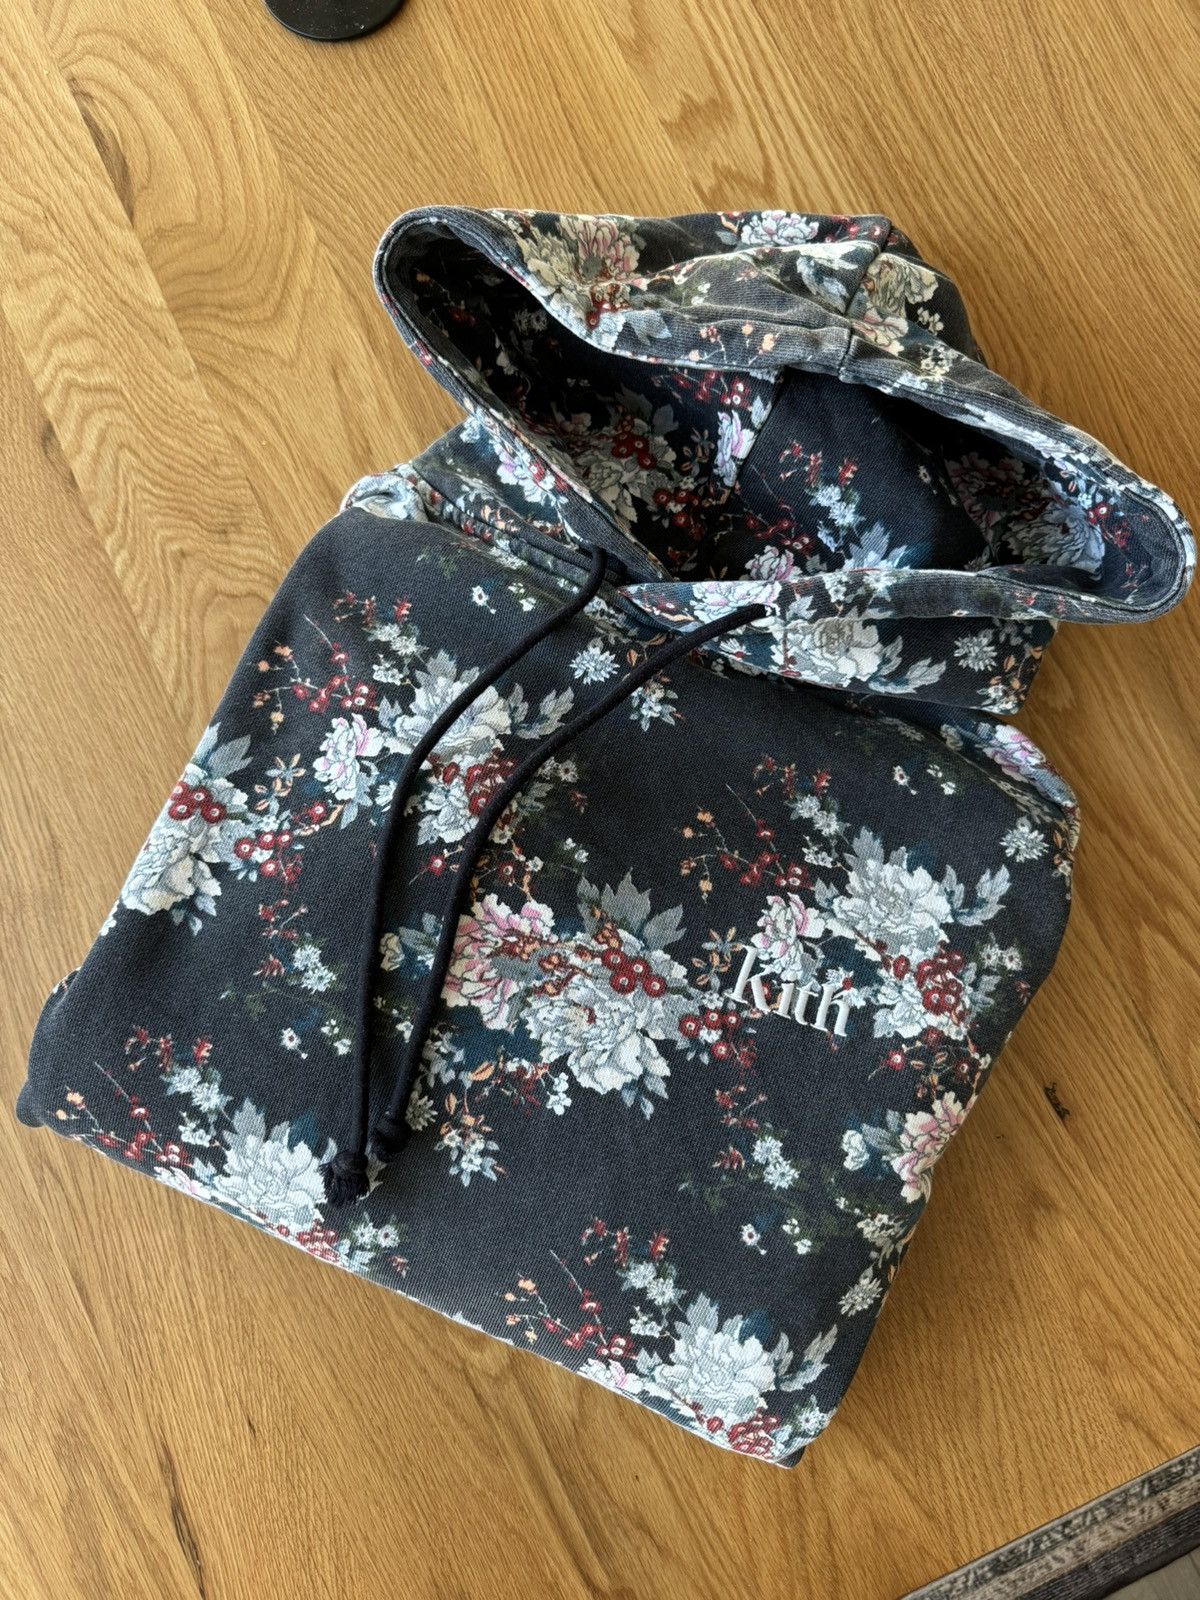 Kith Kith Winter 2019 Floral Hoodie | Grailed